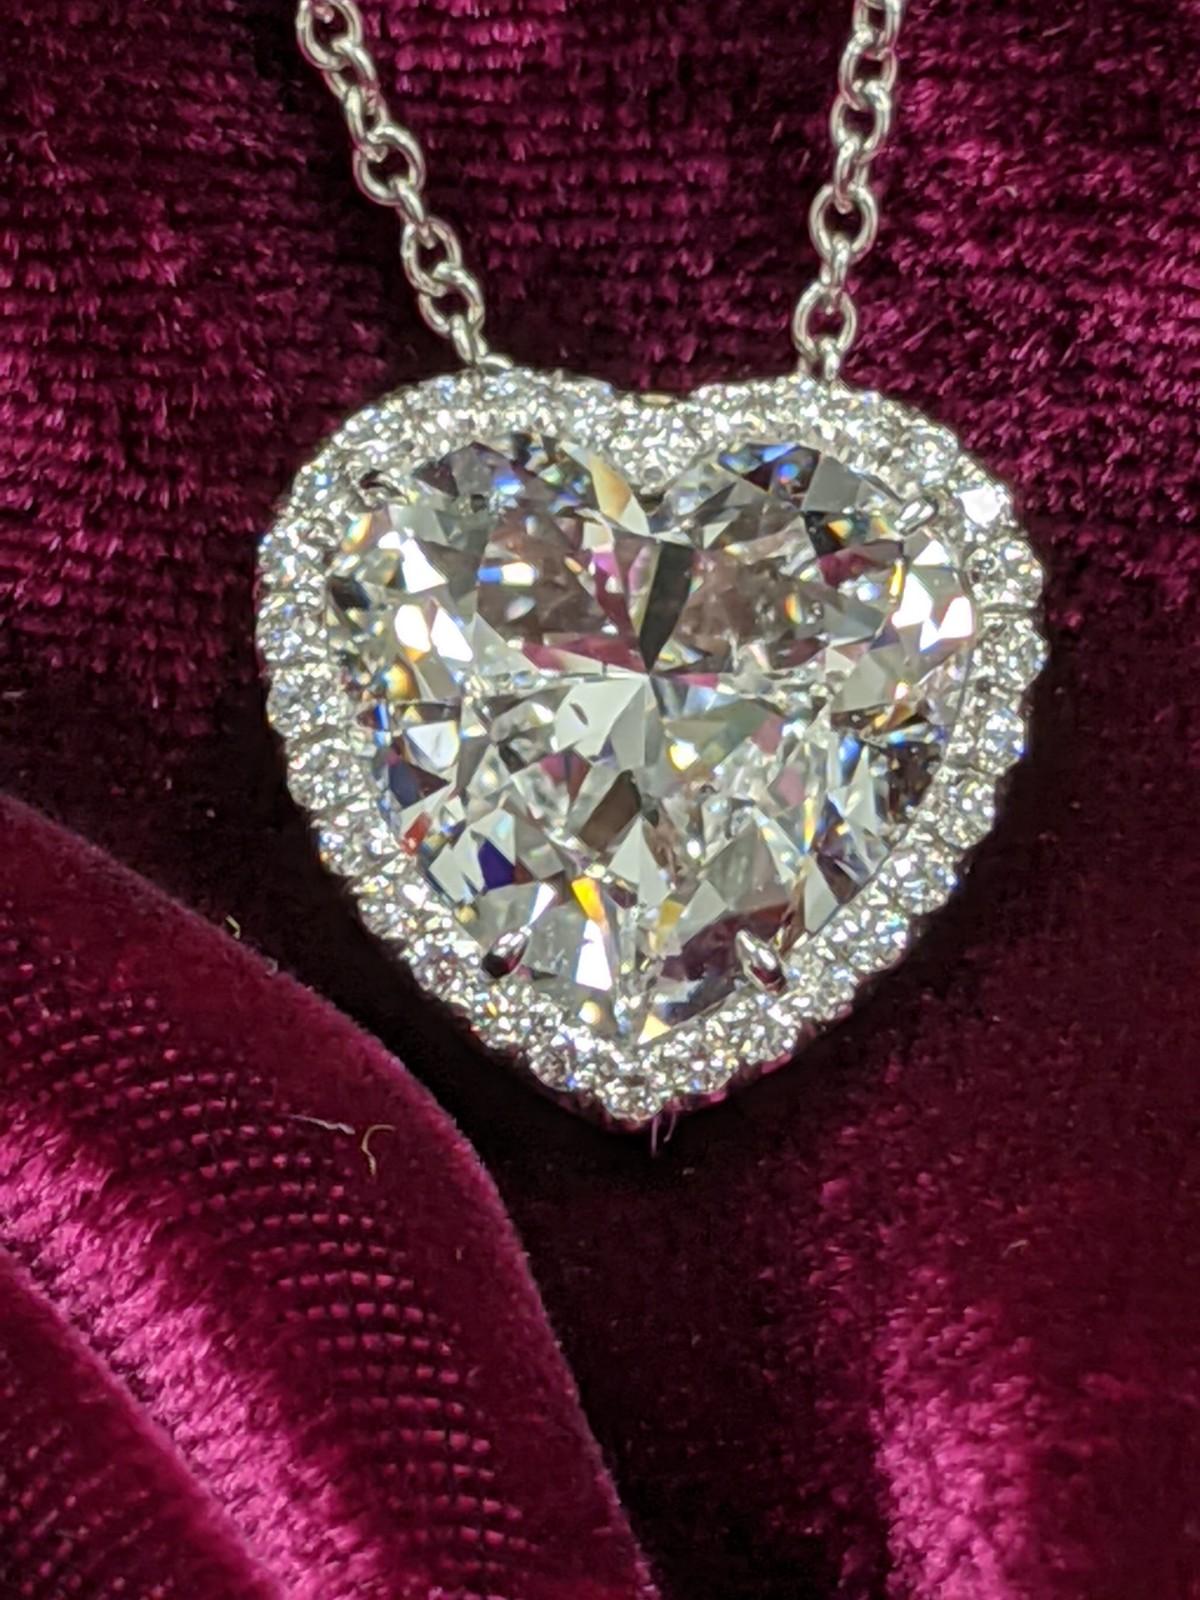 8 ct. Heart Shape diamond is surrounded by a halo of 30 small round diamonds (0.30 ct).  Center diamond is GIA certified as an E color with SI-1 clarity, but you wouldn’t be able to see a speck of inclusions with the naked eye (GIA report upon